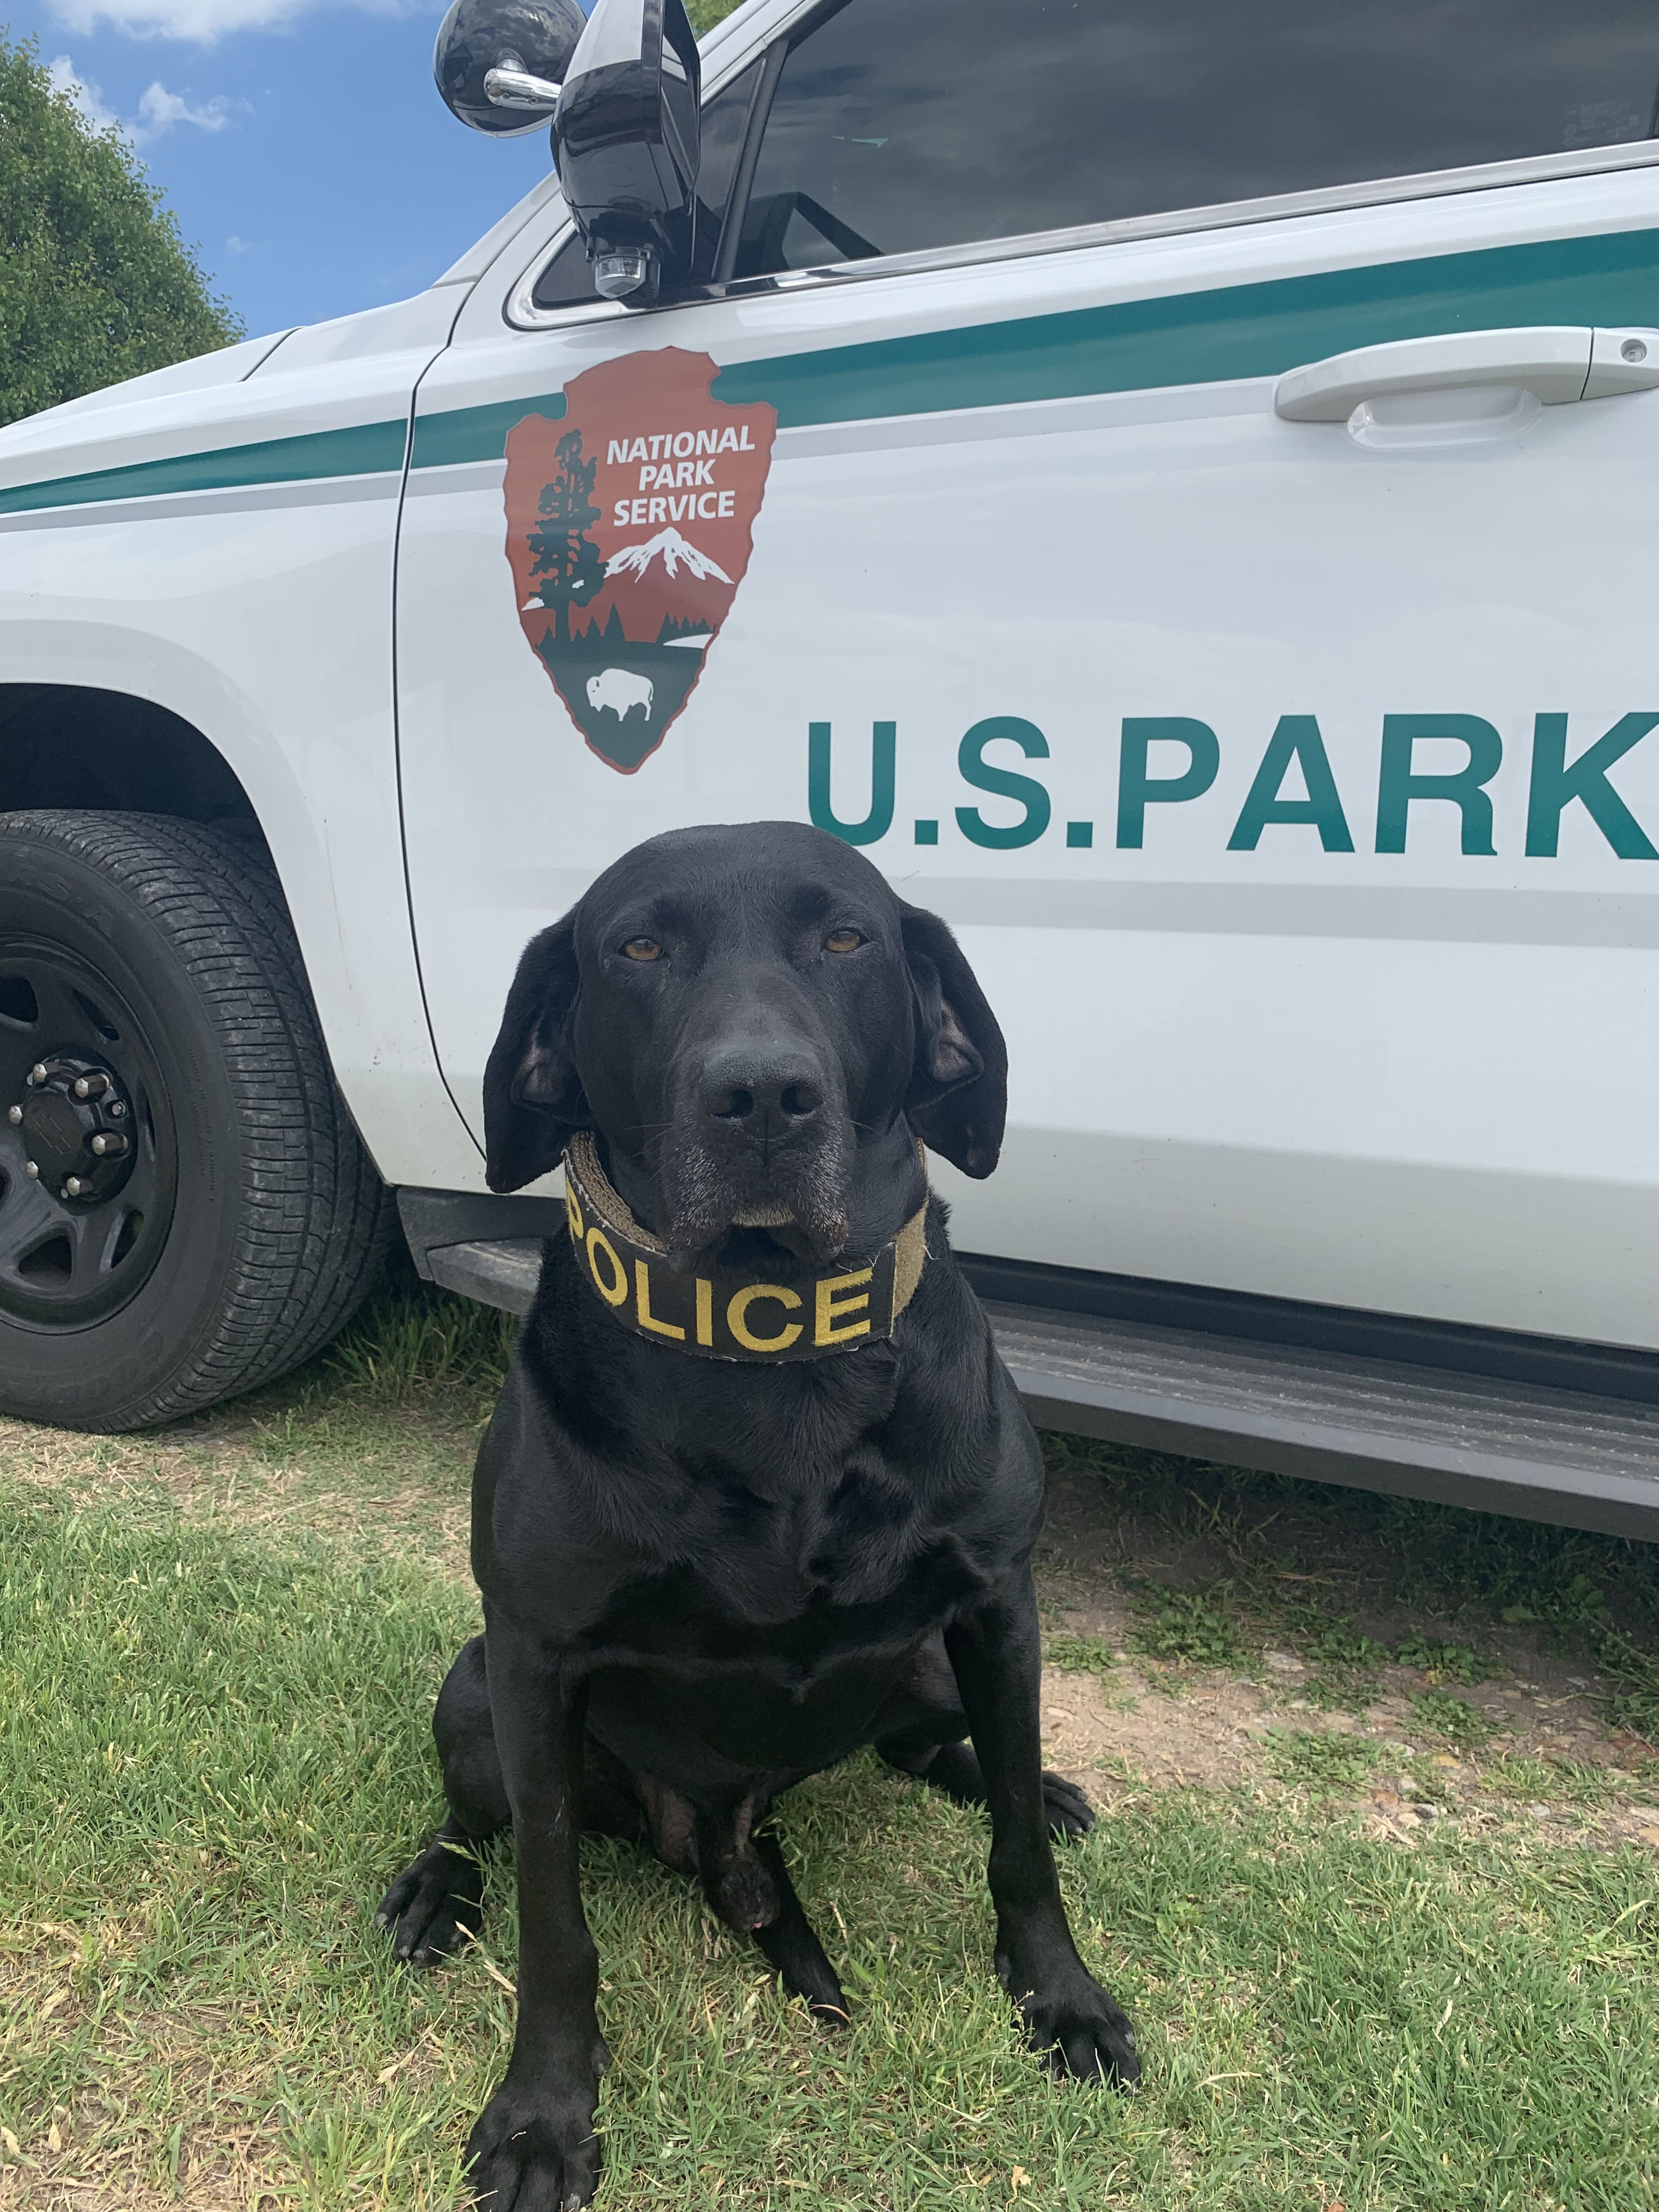 A black lab wearing a collar with the word "Police" sits in front of a law enforcement SUV.